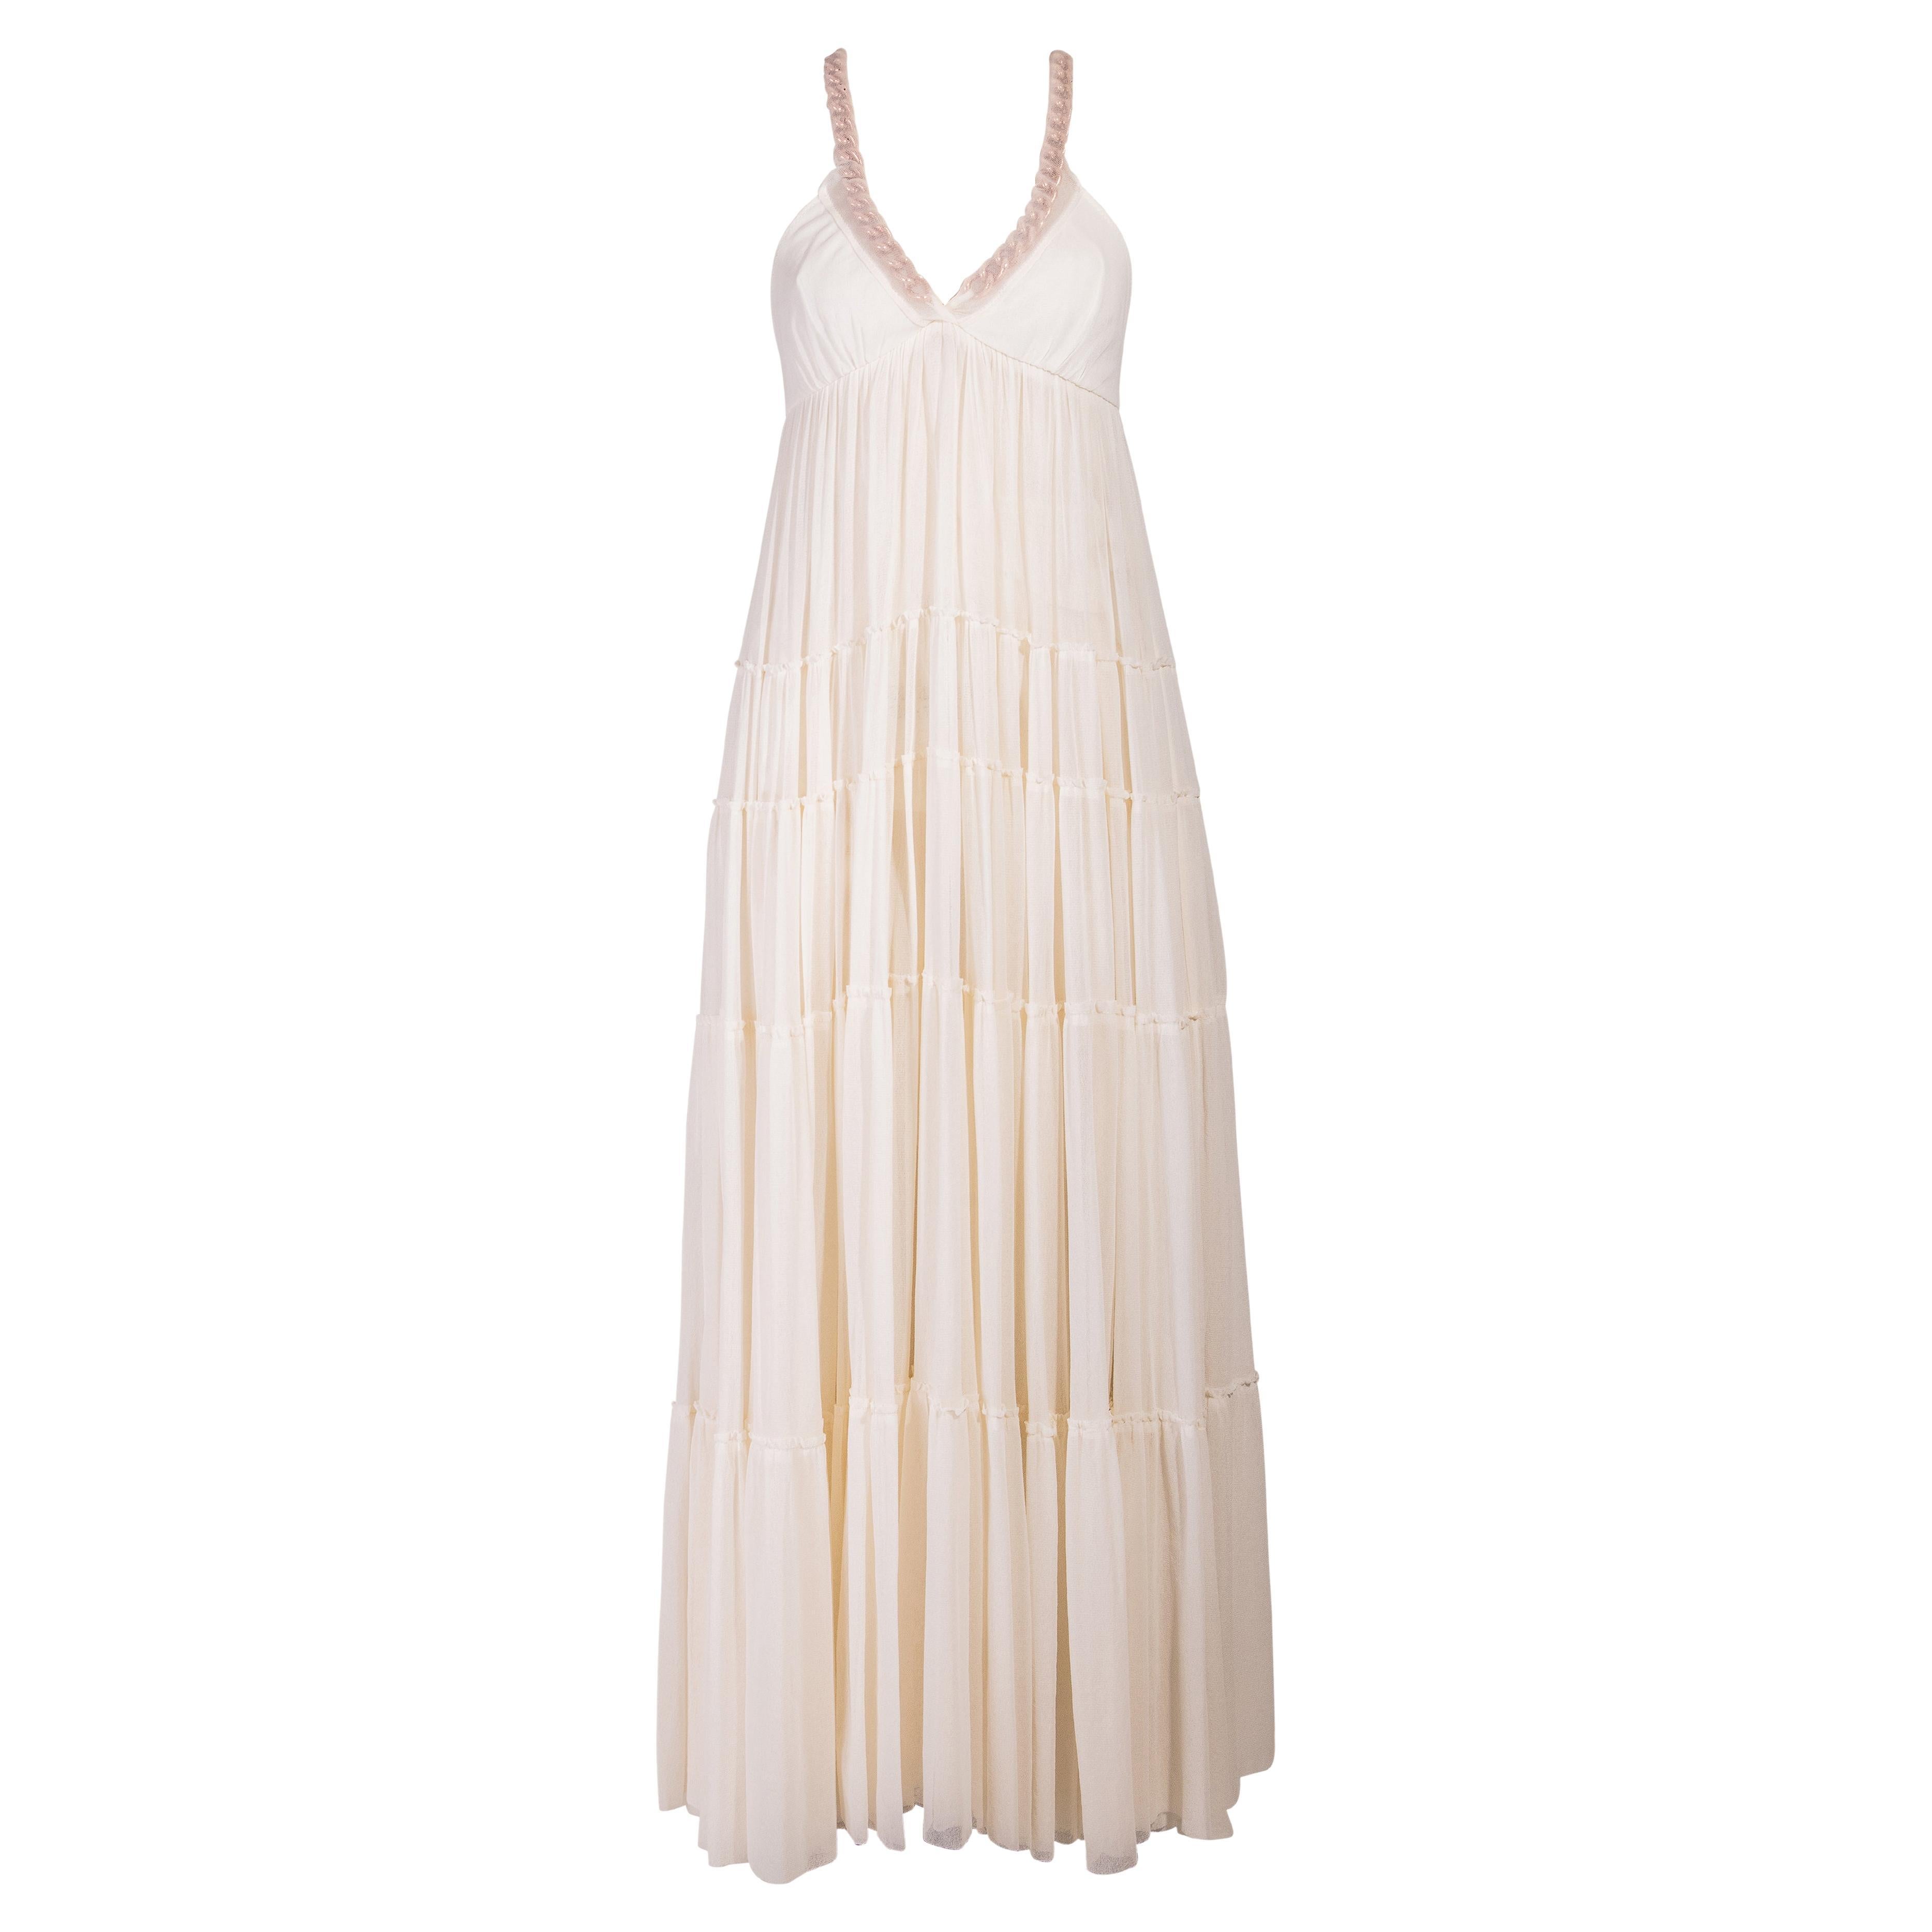 2000's Jean Paul Gaultier White Ruffle Dress with Chain Straps